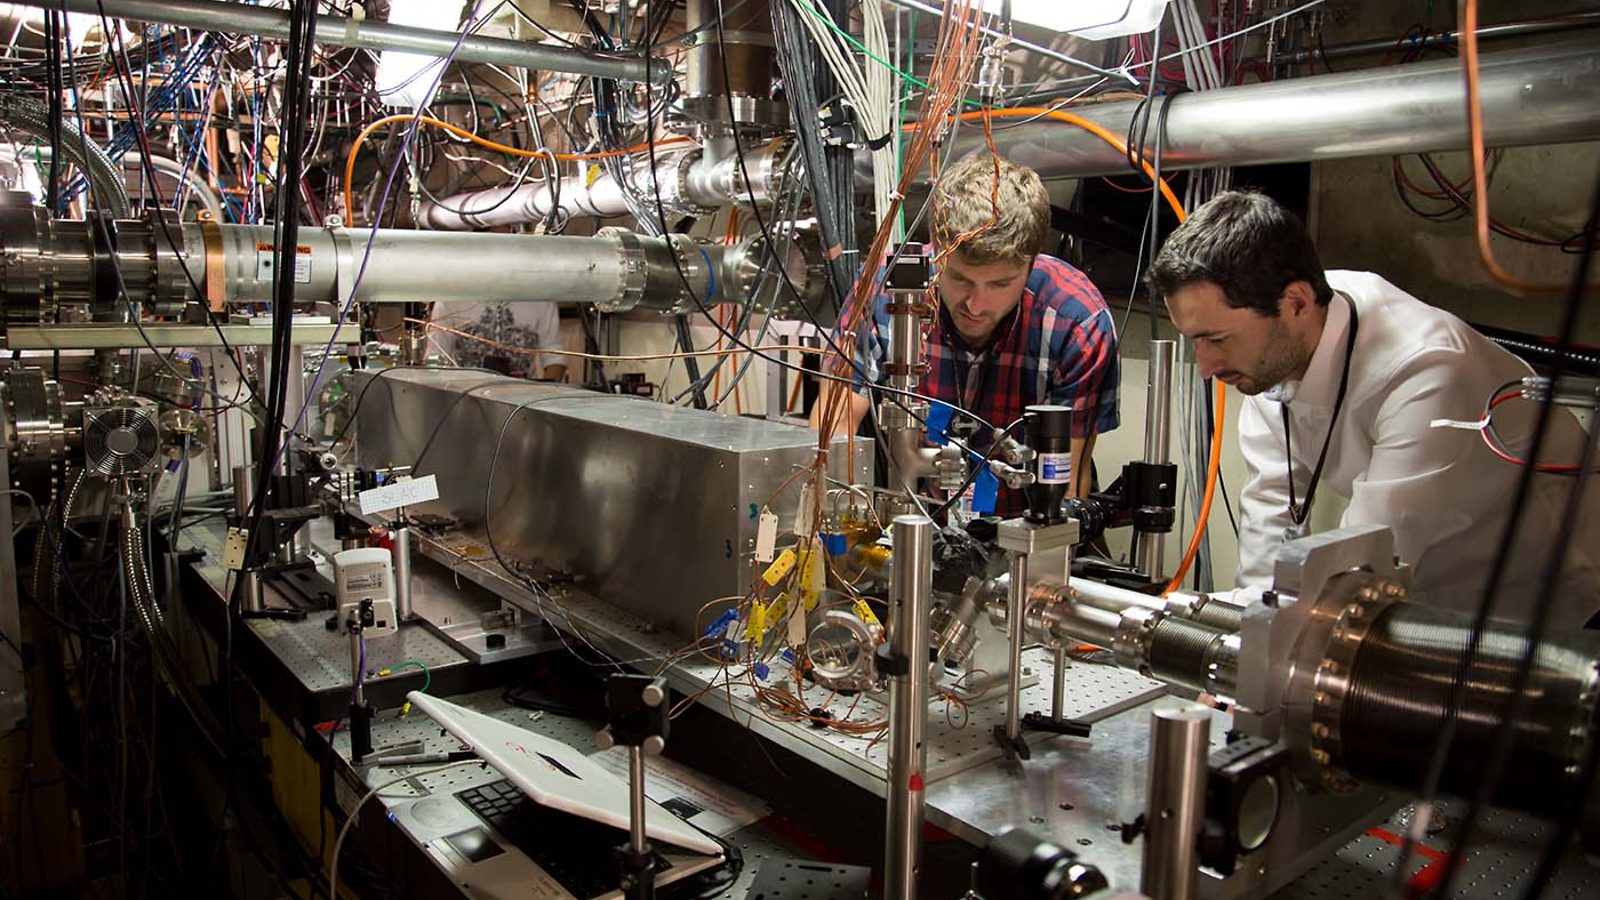 Spencer Gessner, and Sebastien Corde monitor pairs of electron bunches at th Facility for Advanced Accelerator Experimental Test